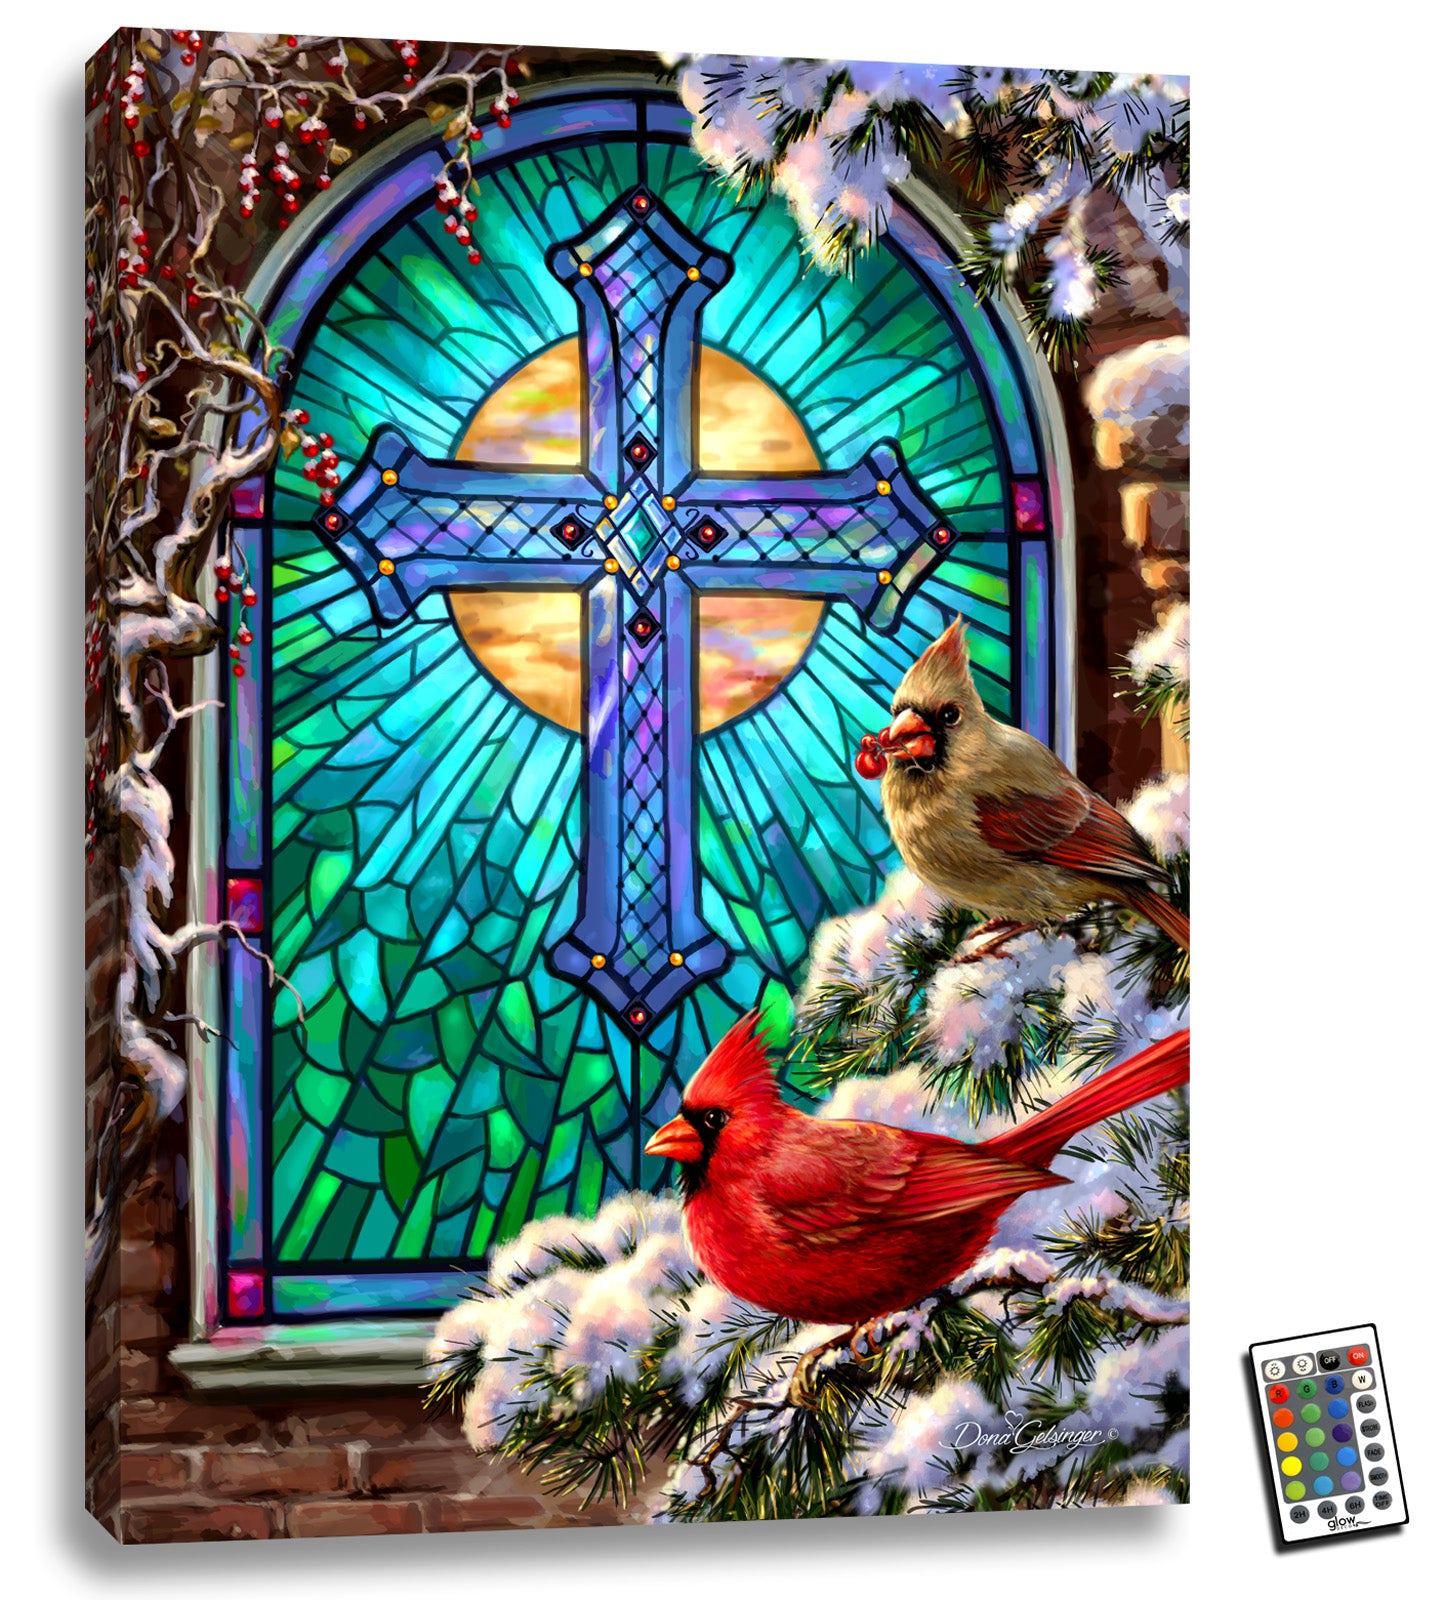  This stunning 18x24 piece features two graceful cardinals perched on a snow-covered branch, set against a backdrop of richly colored stained glass.